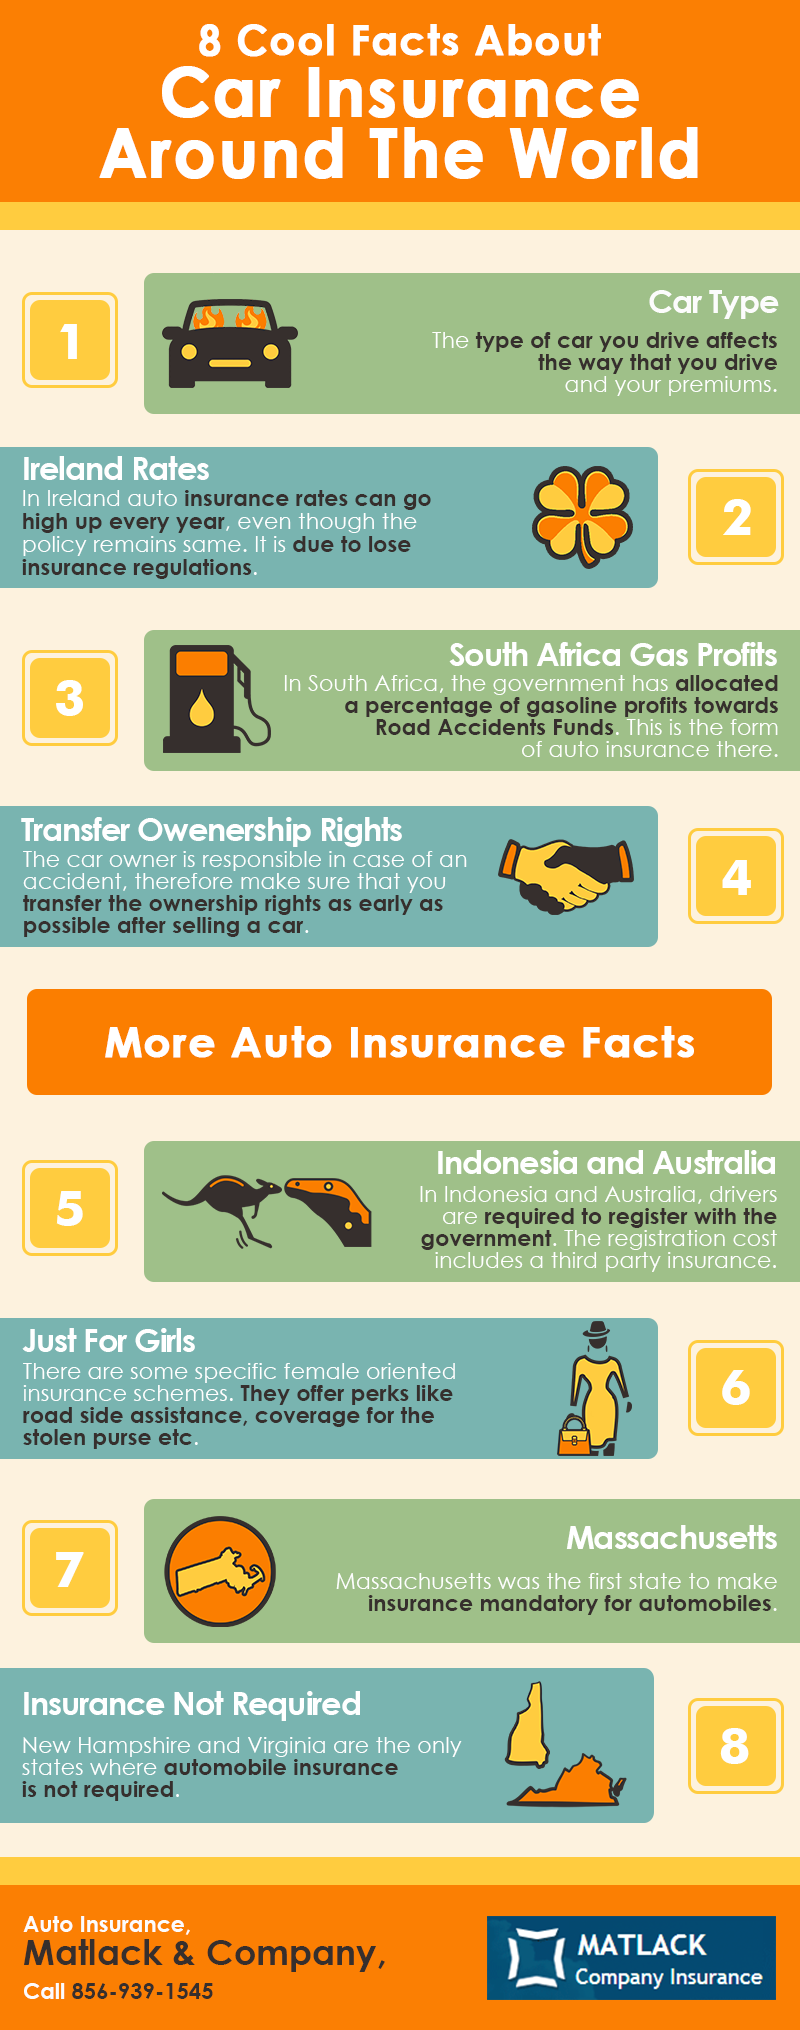 8 Cool Facts About Car Insurance Around the World | Shared ...